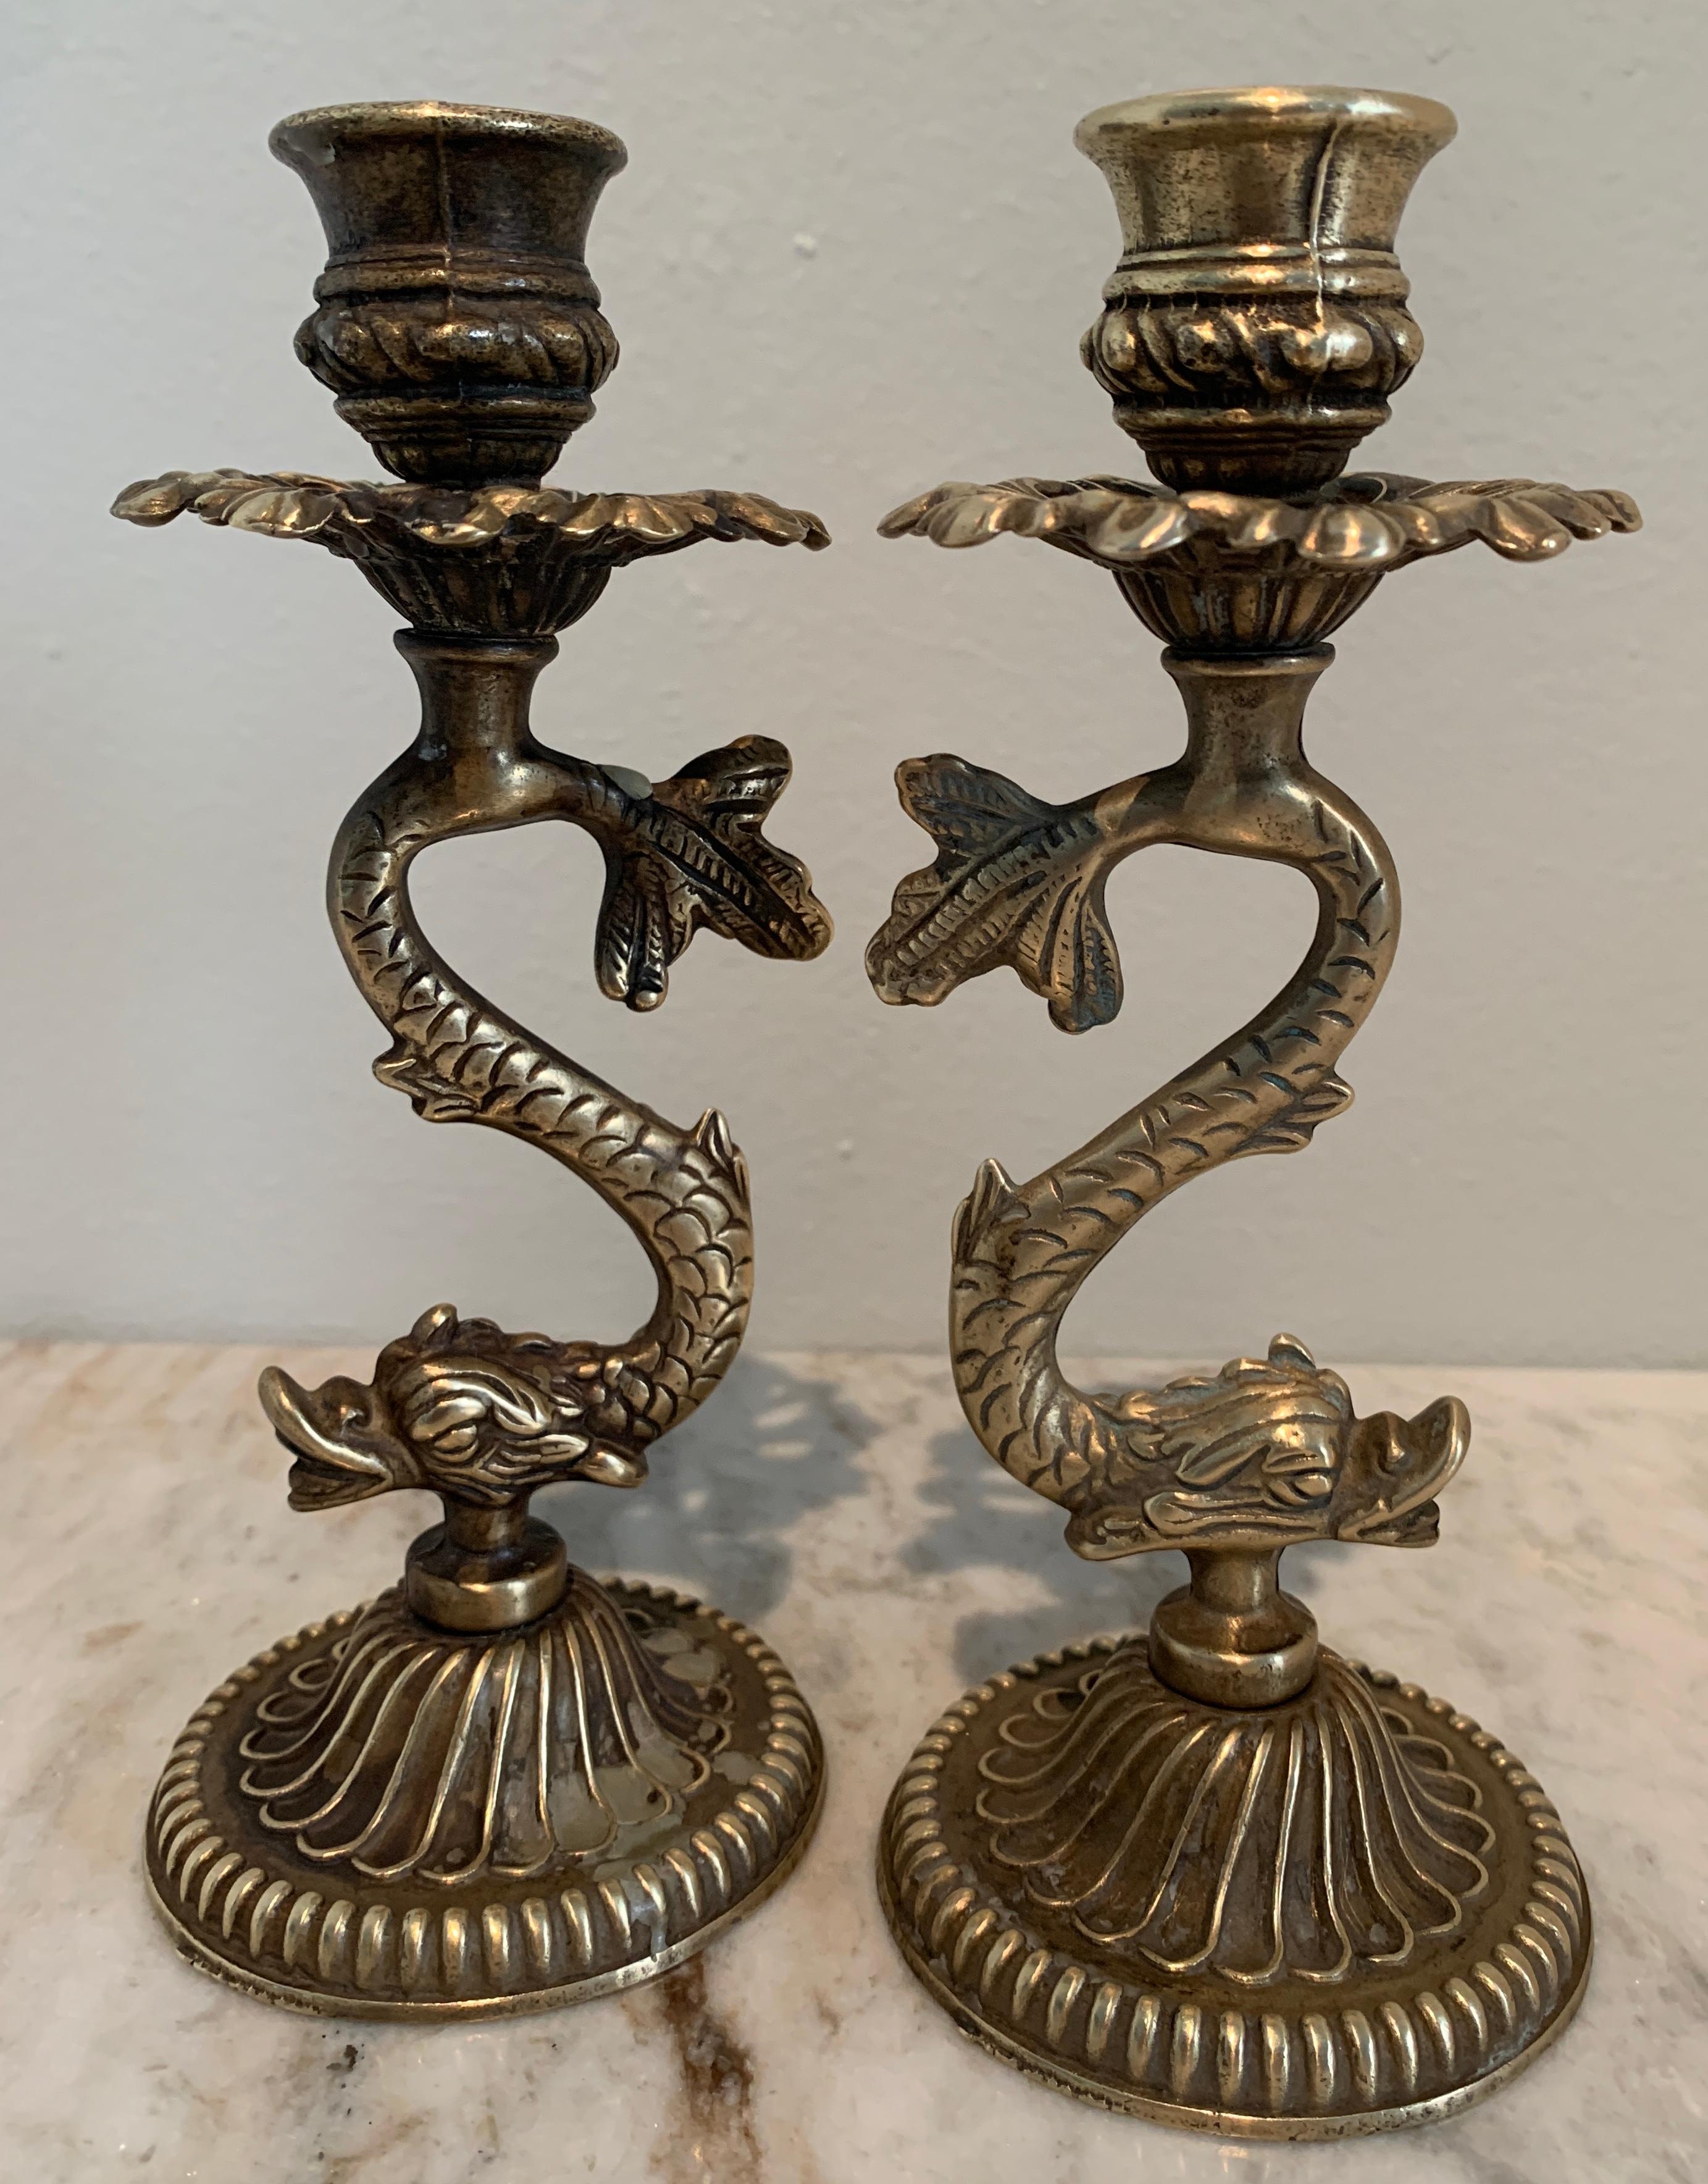 Pair of solid brass candlesticks of brass - a wonderful compliment to candlelit dinner or flanking a shelf or mantel (fireplace). Wonderful for the holidays or for a gift. A stunning pair.